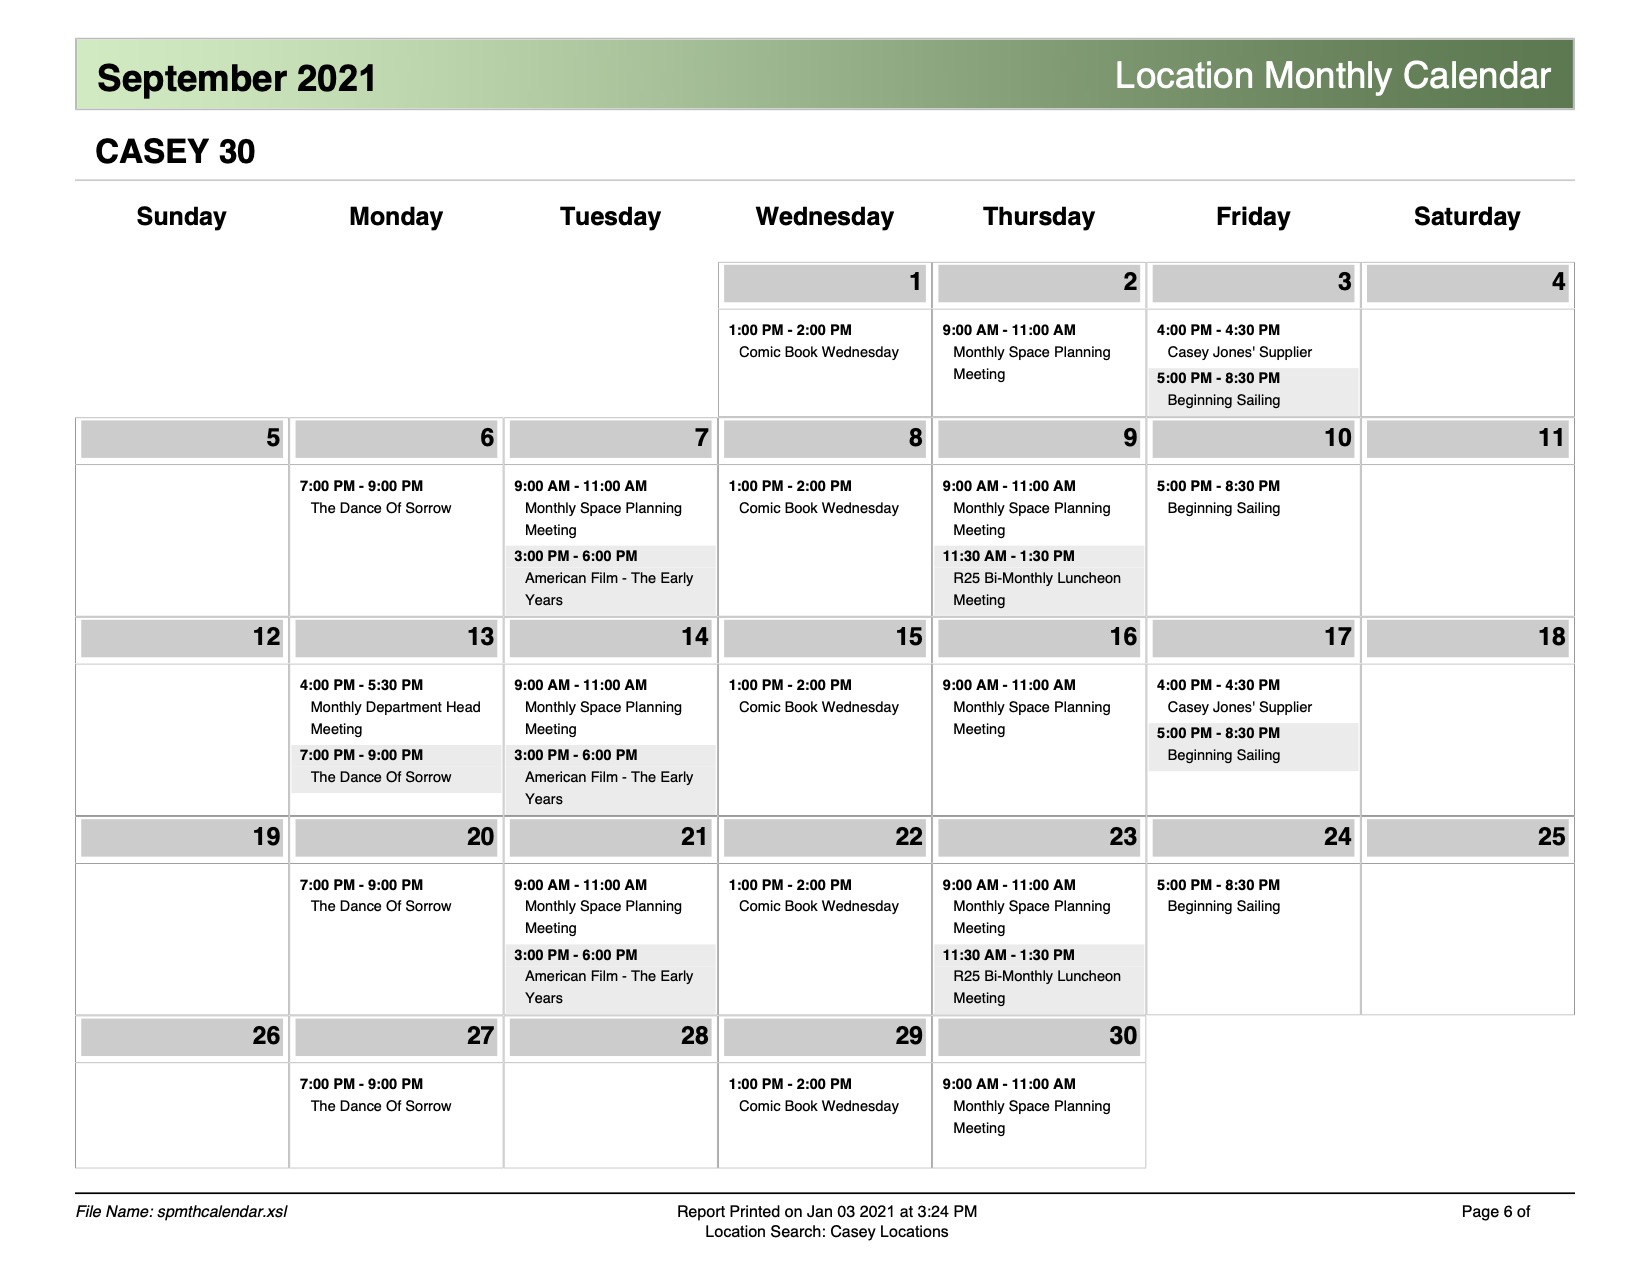 Location monthly calendar example